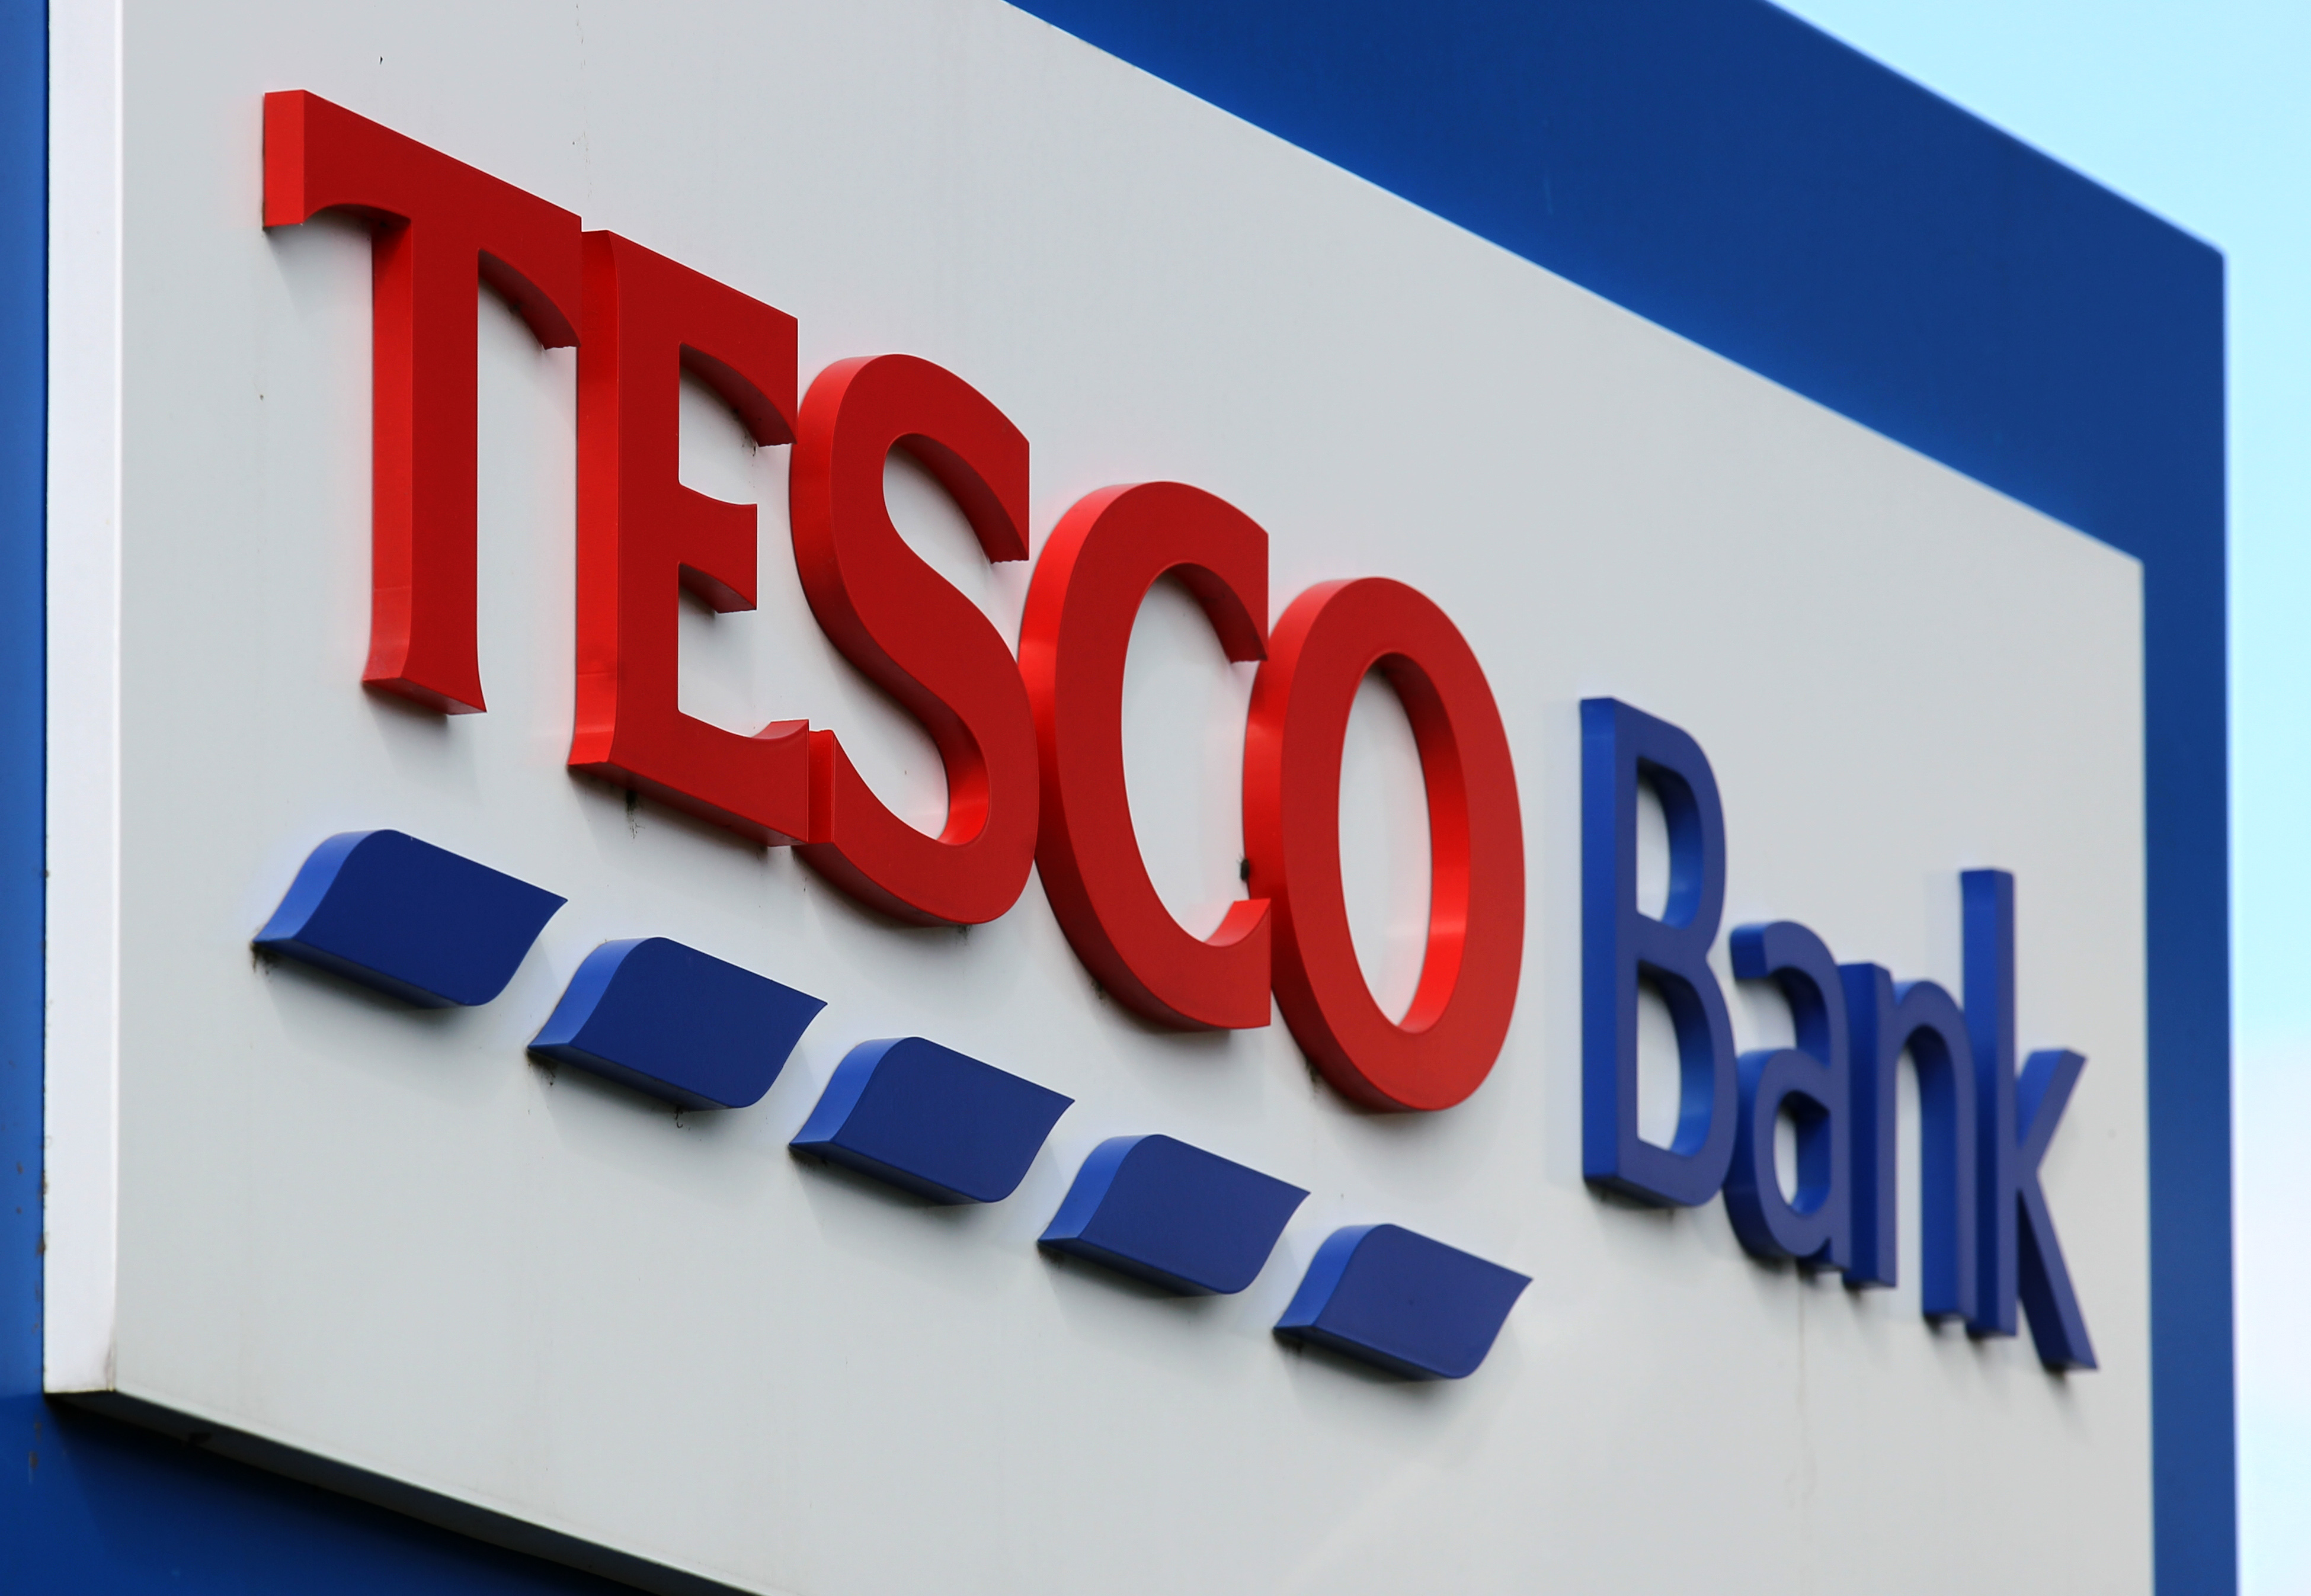 Tesco Bank has been sold to Barclays and there are not expected to be any job losses